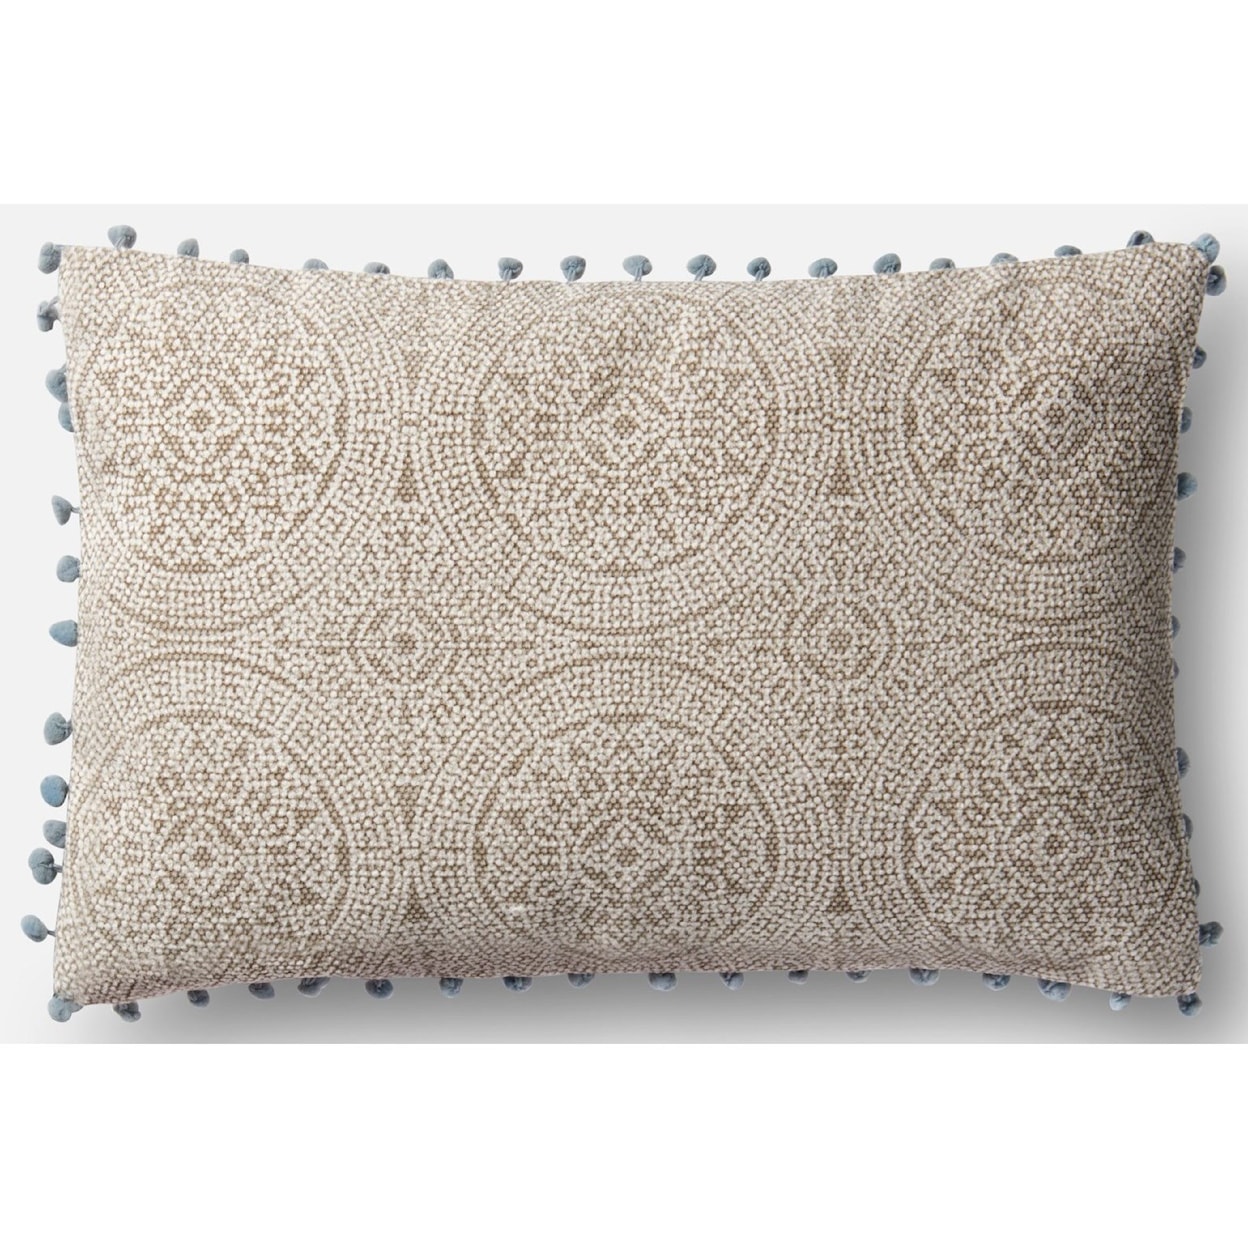 Magnolia Home by Joanna Gaines for Loloi Accent Pillows 13" X 21" Cover w/Down Pillow